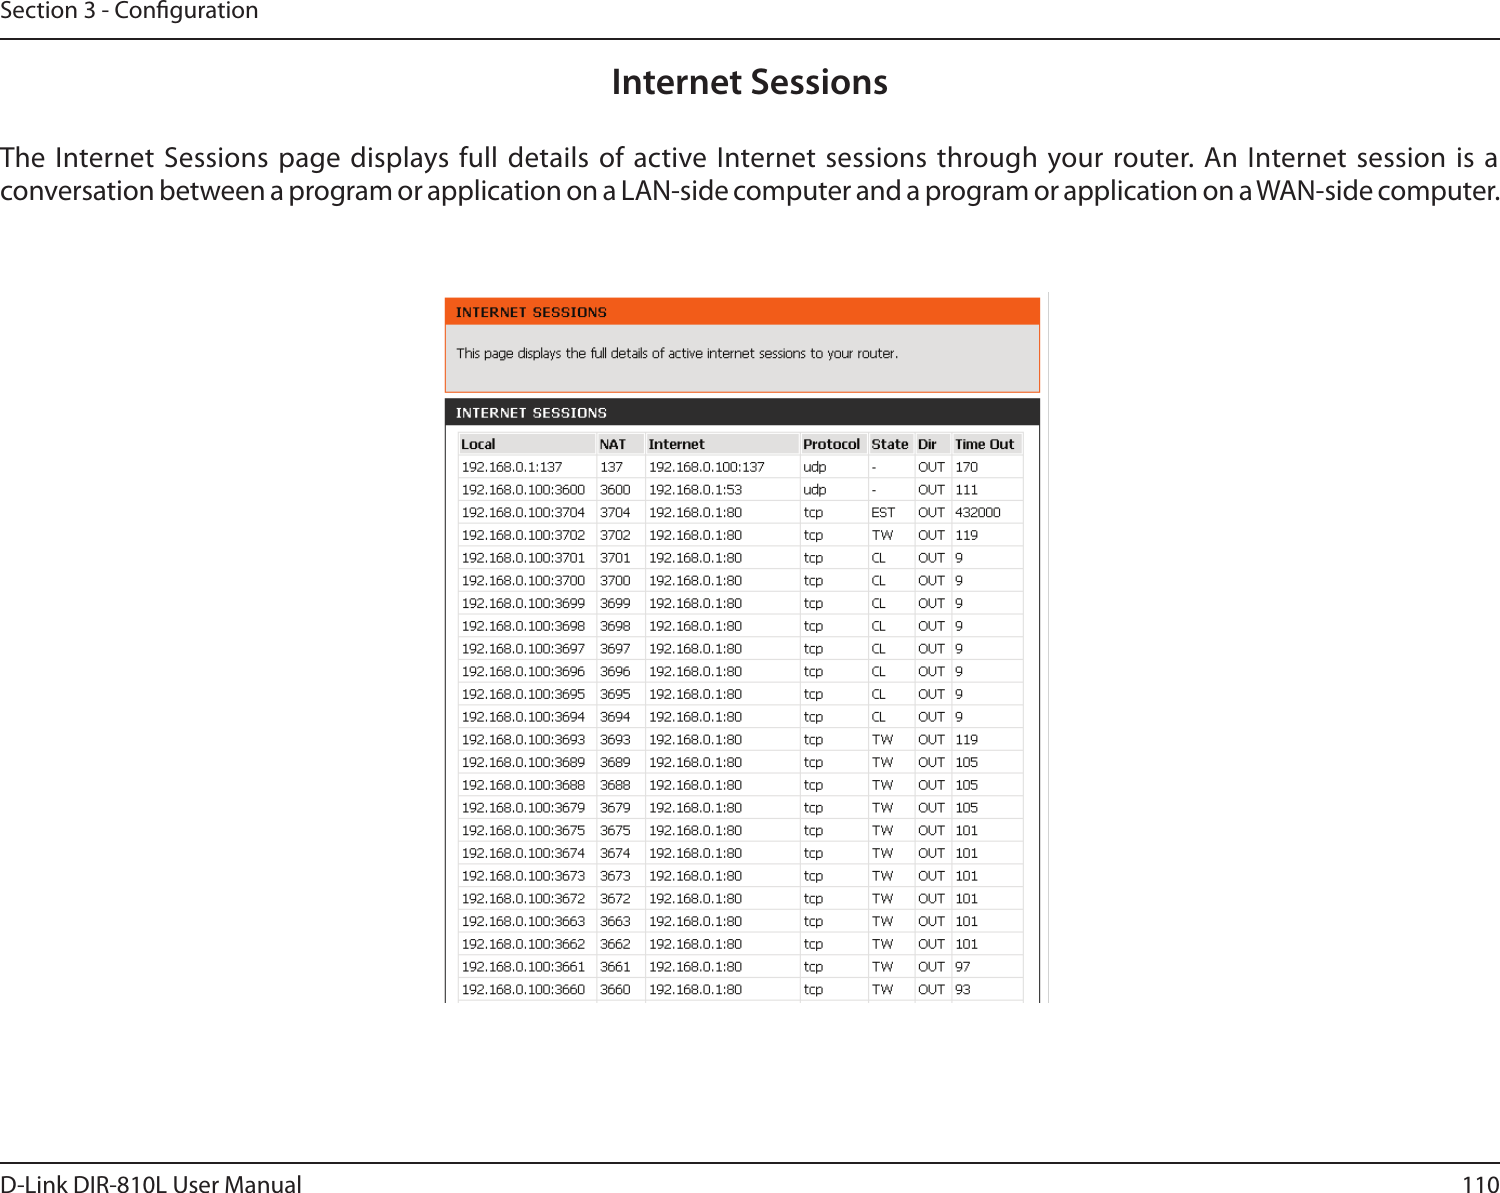 110D-Link DIR-810L User ManualSection 3 - CongurationInternet SessionsThe Internet Sessions page displays full  details of  active Internet sessions through your router. An Internet session is a conversation between a program or application on a LAN-side computer and a program or application on a WAN-side computer. 